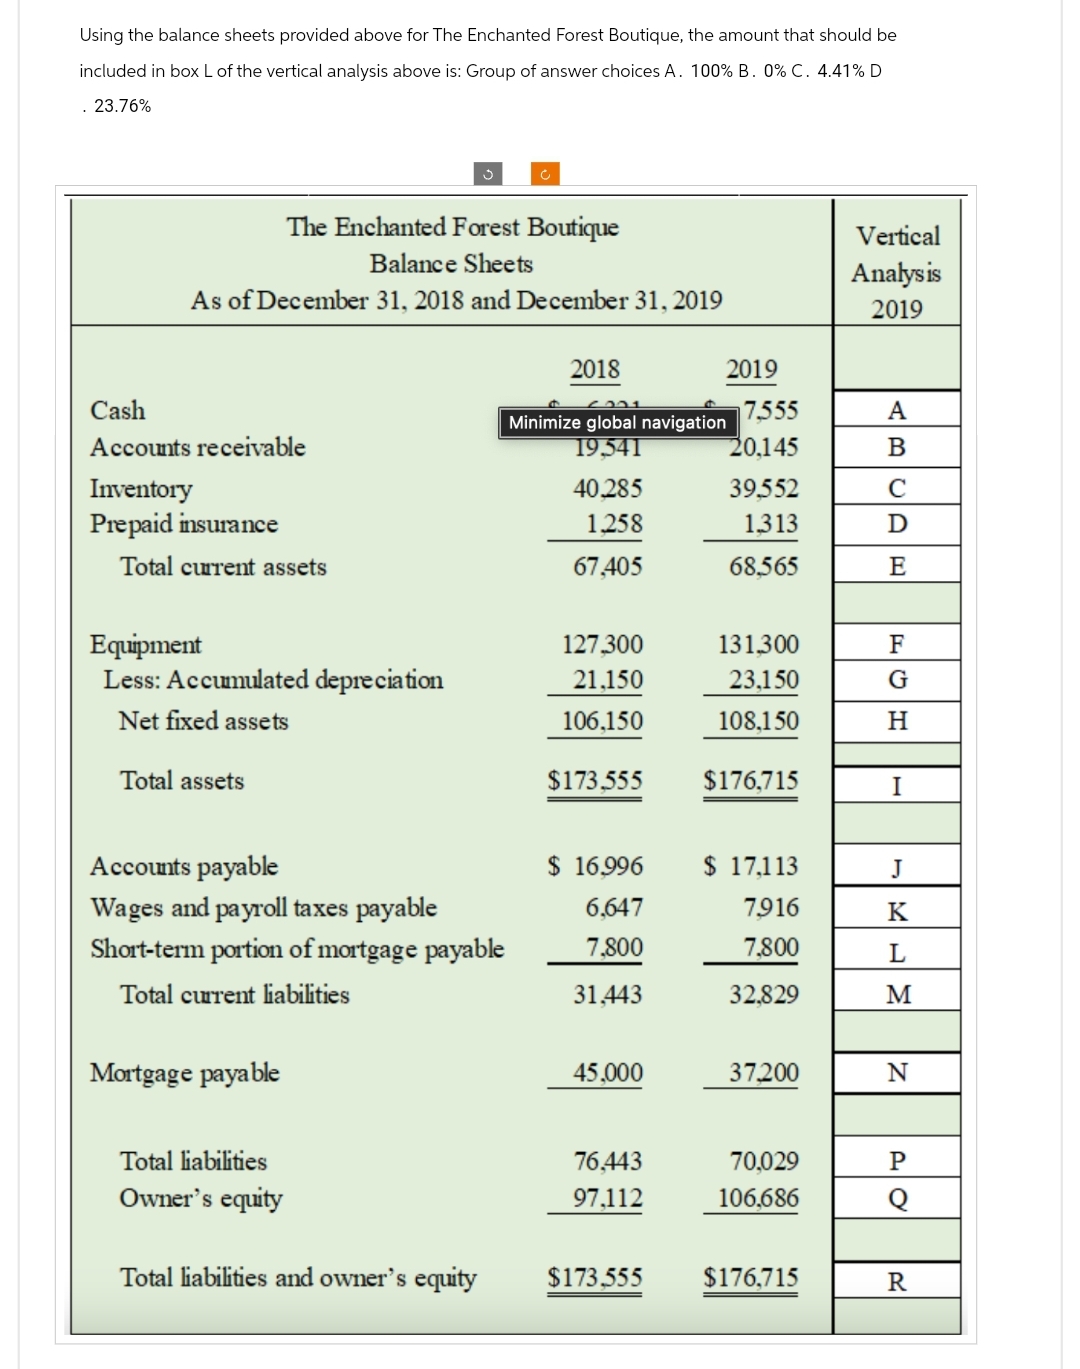 Using the balance sheets provided above for The Enchanted Forest Boutique, the amount that should be
included in box L of the vertical analysis above is: Group of answer choices A. 100% B. 0% C. 4.41% D
. 23.76%
The Enchanted Forest Boutique
Balance Sheets
As of December 31, 2018 and December 31, 2019
Cash
Accounts receivable
Inventory
Prepaid insurance
Total current assets
Equipment
Less: Accumulated depreciation
Net fixed assets
Total assets
Accounts payable
Wages and payroll taxes payable
Short-term portion of mortgage payable
Total current liabilities
Mortgage payable
Total liabilities
Owner's equity
c
Total liabilities and owner's equity
2018
Minimize global navigation
19,541
40.285
1.258
67,405
127,300
21.150
106,150
$173,555
$ 16,996
6.647
7.800
31,443
45,000
76.443
97,112
2019
$173.555
17,555
20,145
39,552
1.313
68.565
131,300
23.150
108,150
$176,715
$ 17,113
7,916
7,800
32.829
37.200
70.029
106.686
$176,715
Vertical
Analysis
2019
A
BCDE
с
Ε
F
G
H
I
J
K
L
M
N
P
Q
R